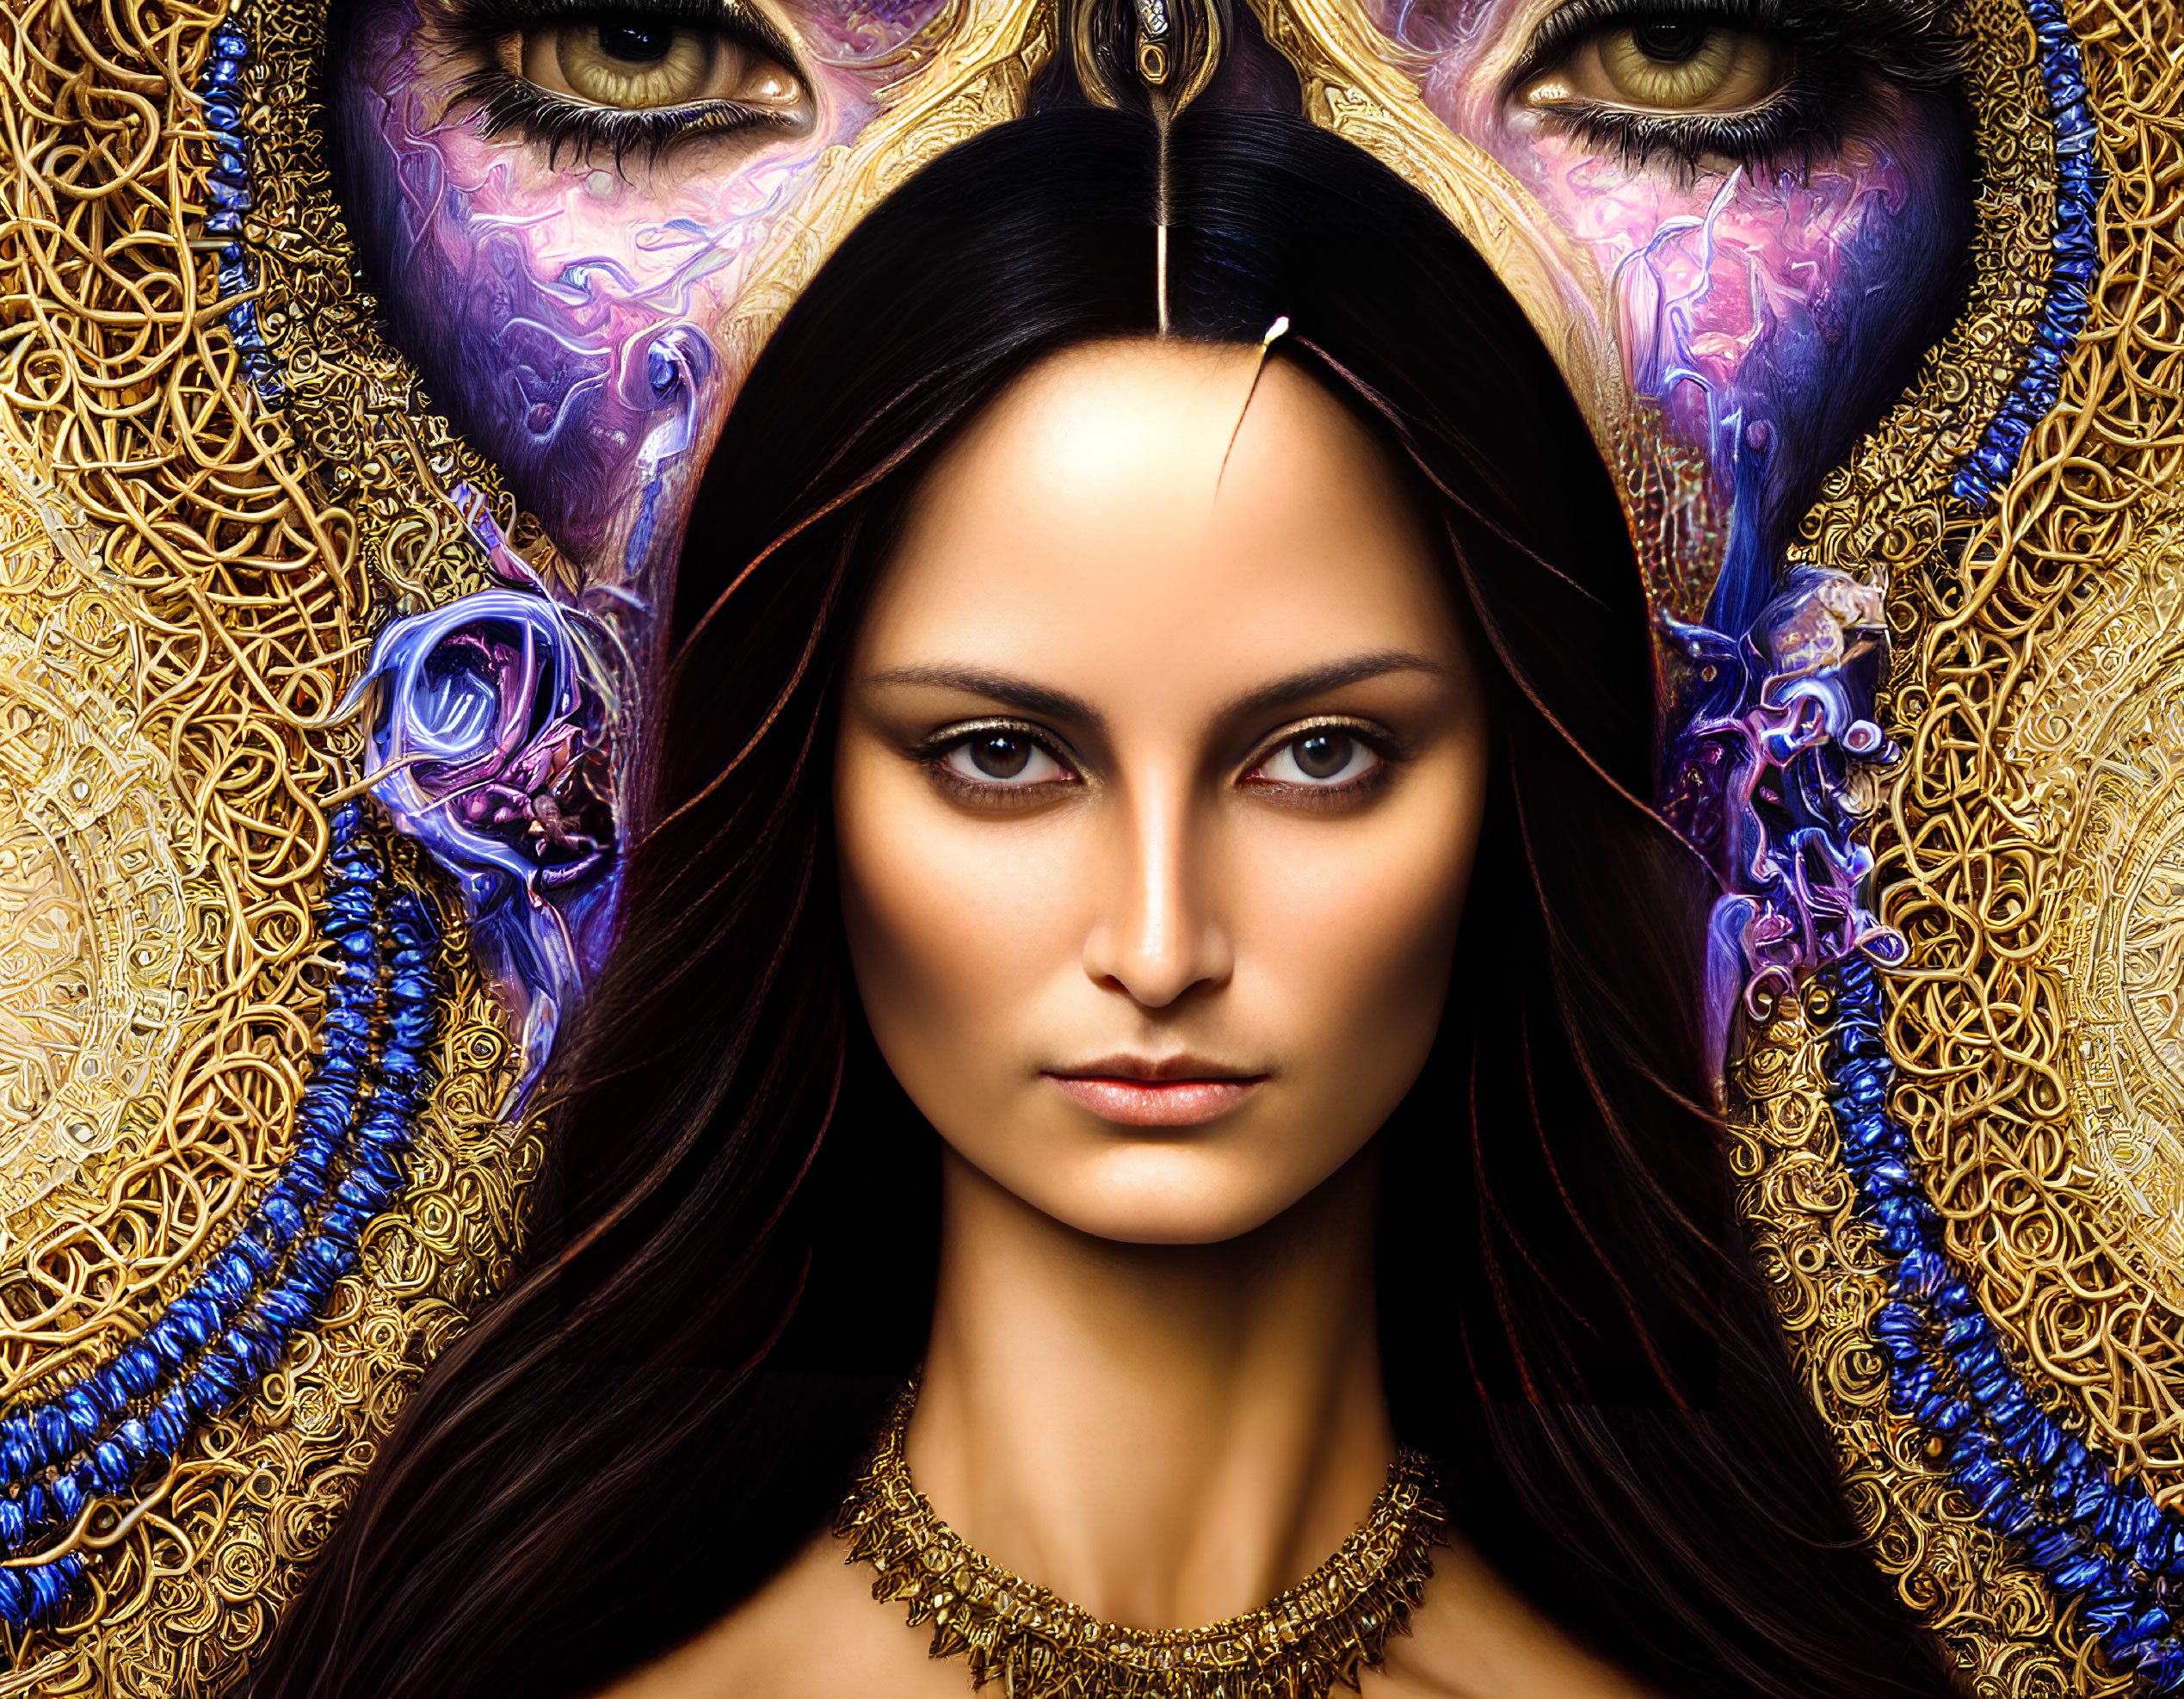 Striking woman with ornate golden and purple designs and intricate patterns.